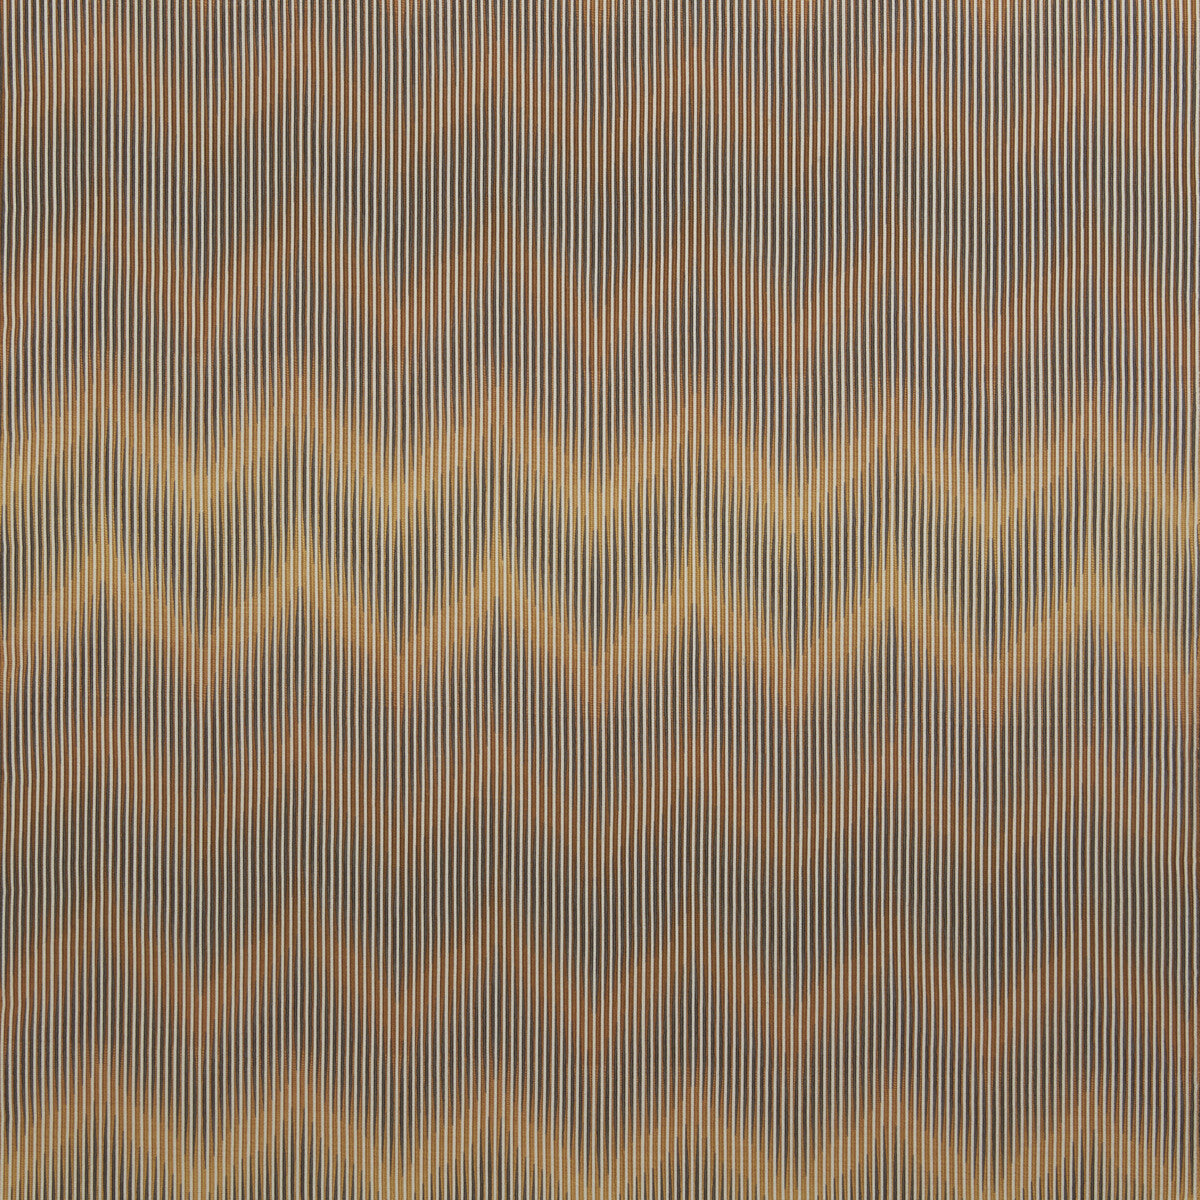 Ande fabric in 162 color - pattern 36151.411.0 - by Kravet Couture in the Missoni Home 2021 collection